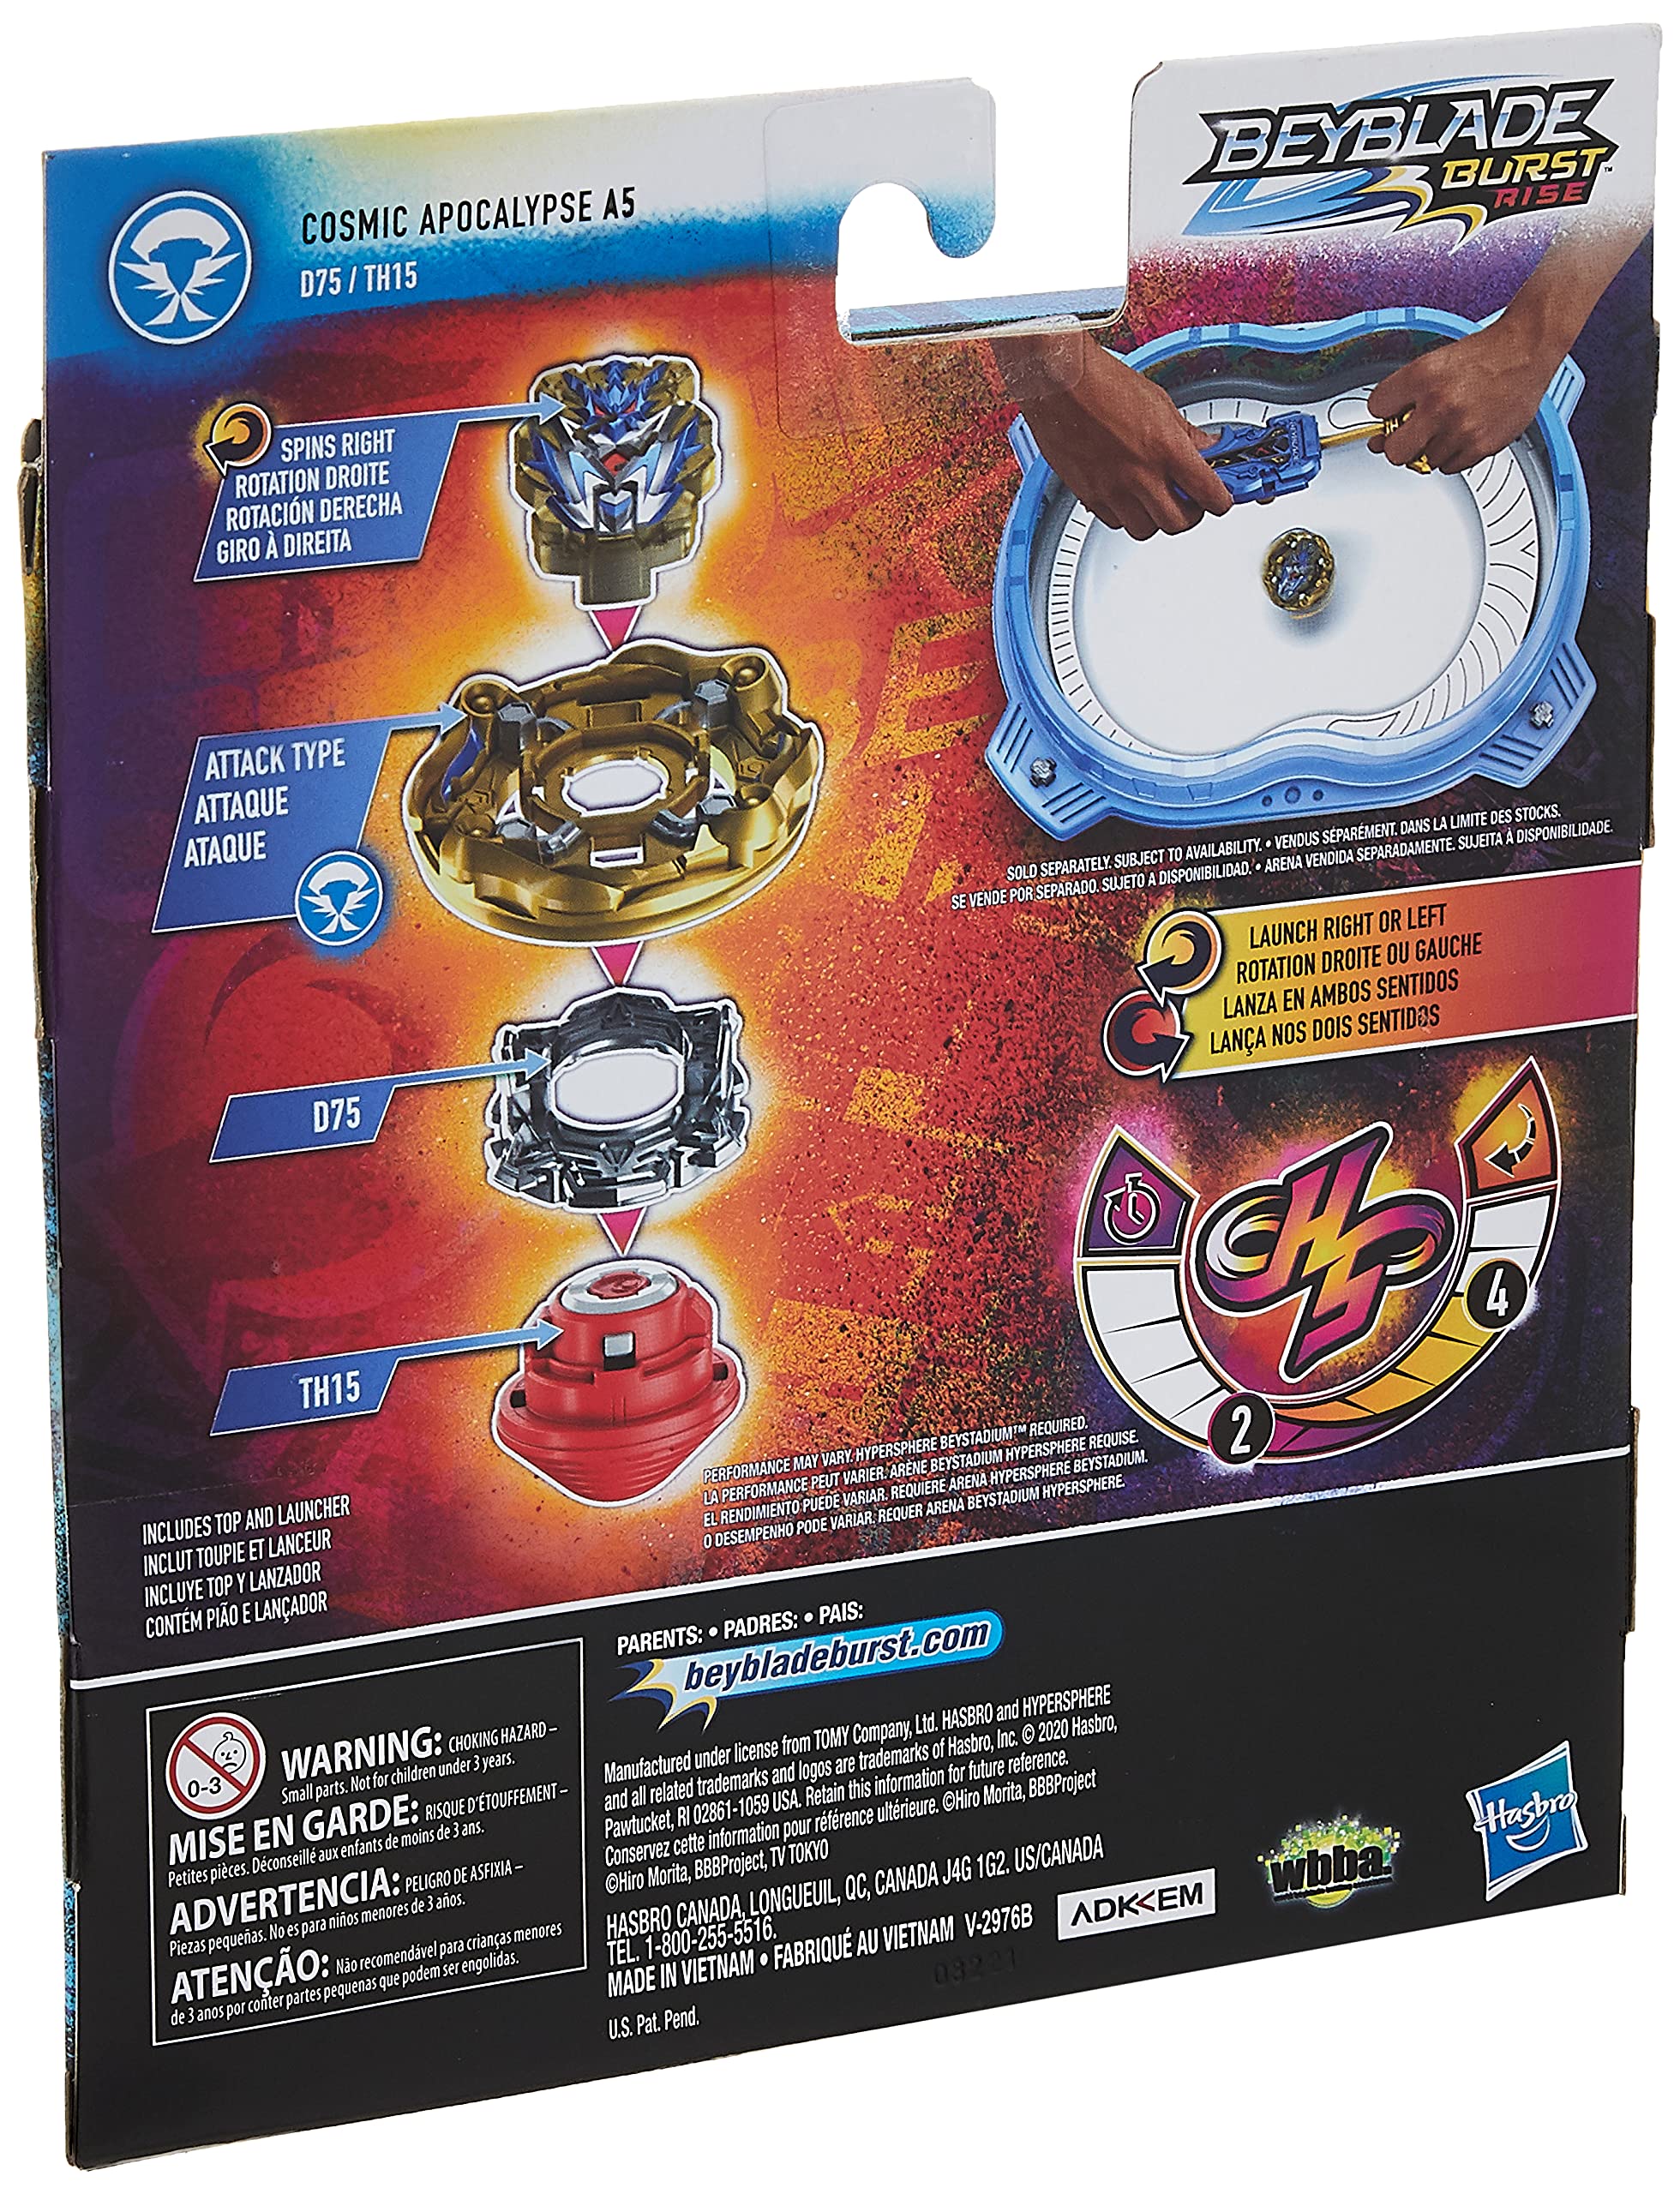 Beyblade Burst Rise Hypersphere Apocalypse Blade Set -- Right/Left-Spin Launcher with Right-Spin Battling Top Toy, Ages 8 and Up